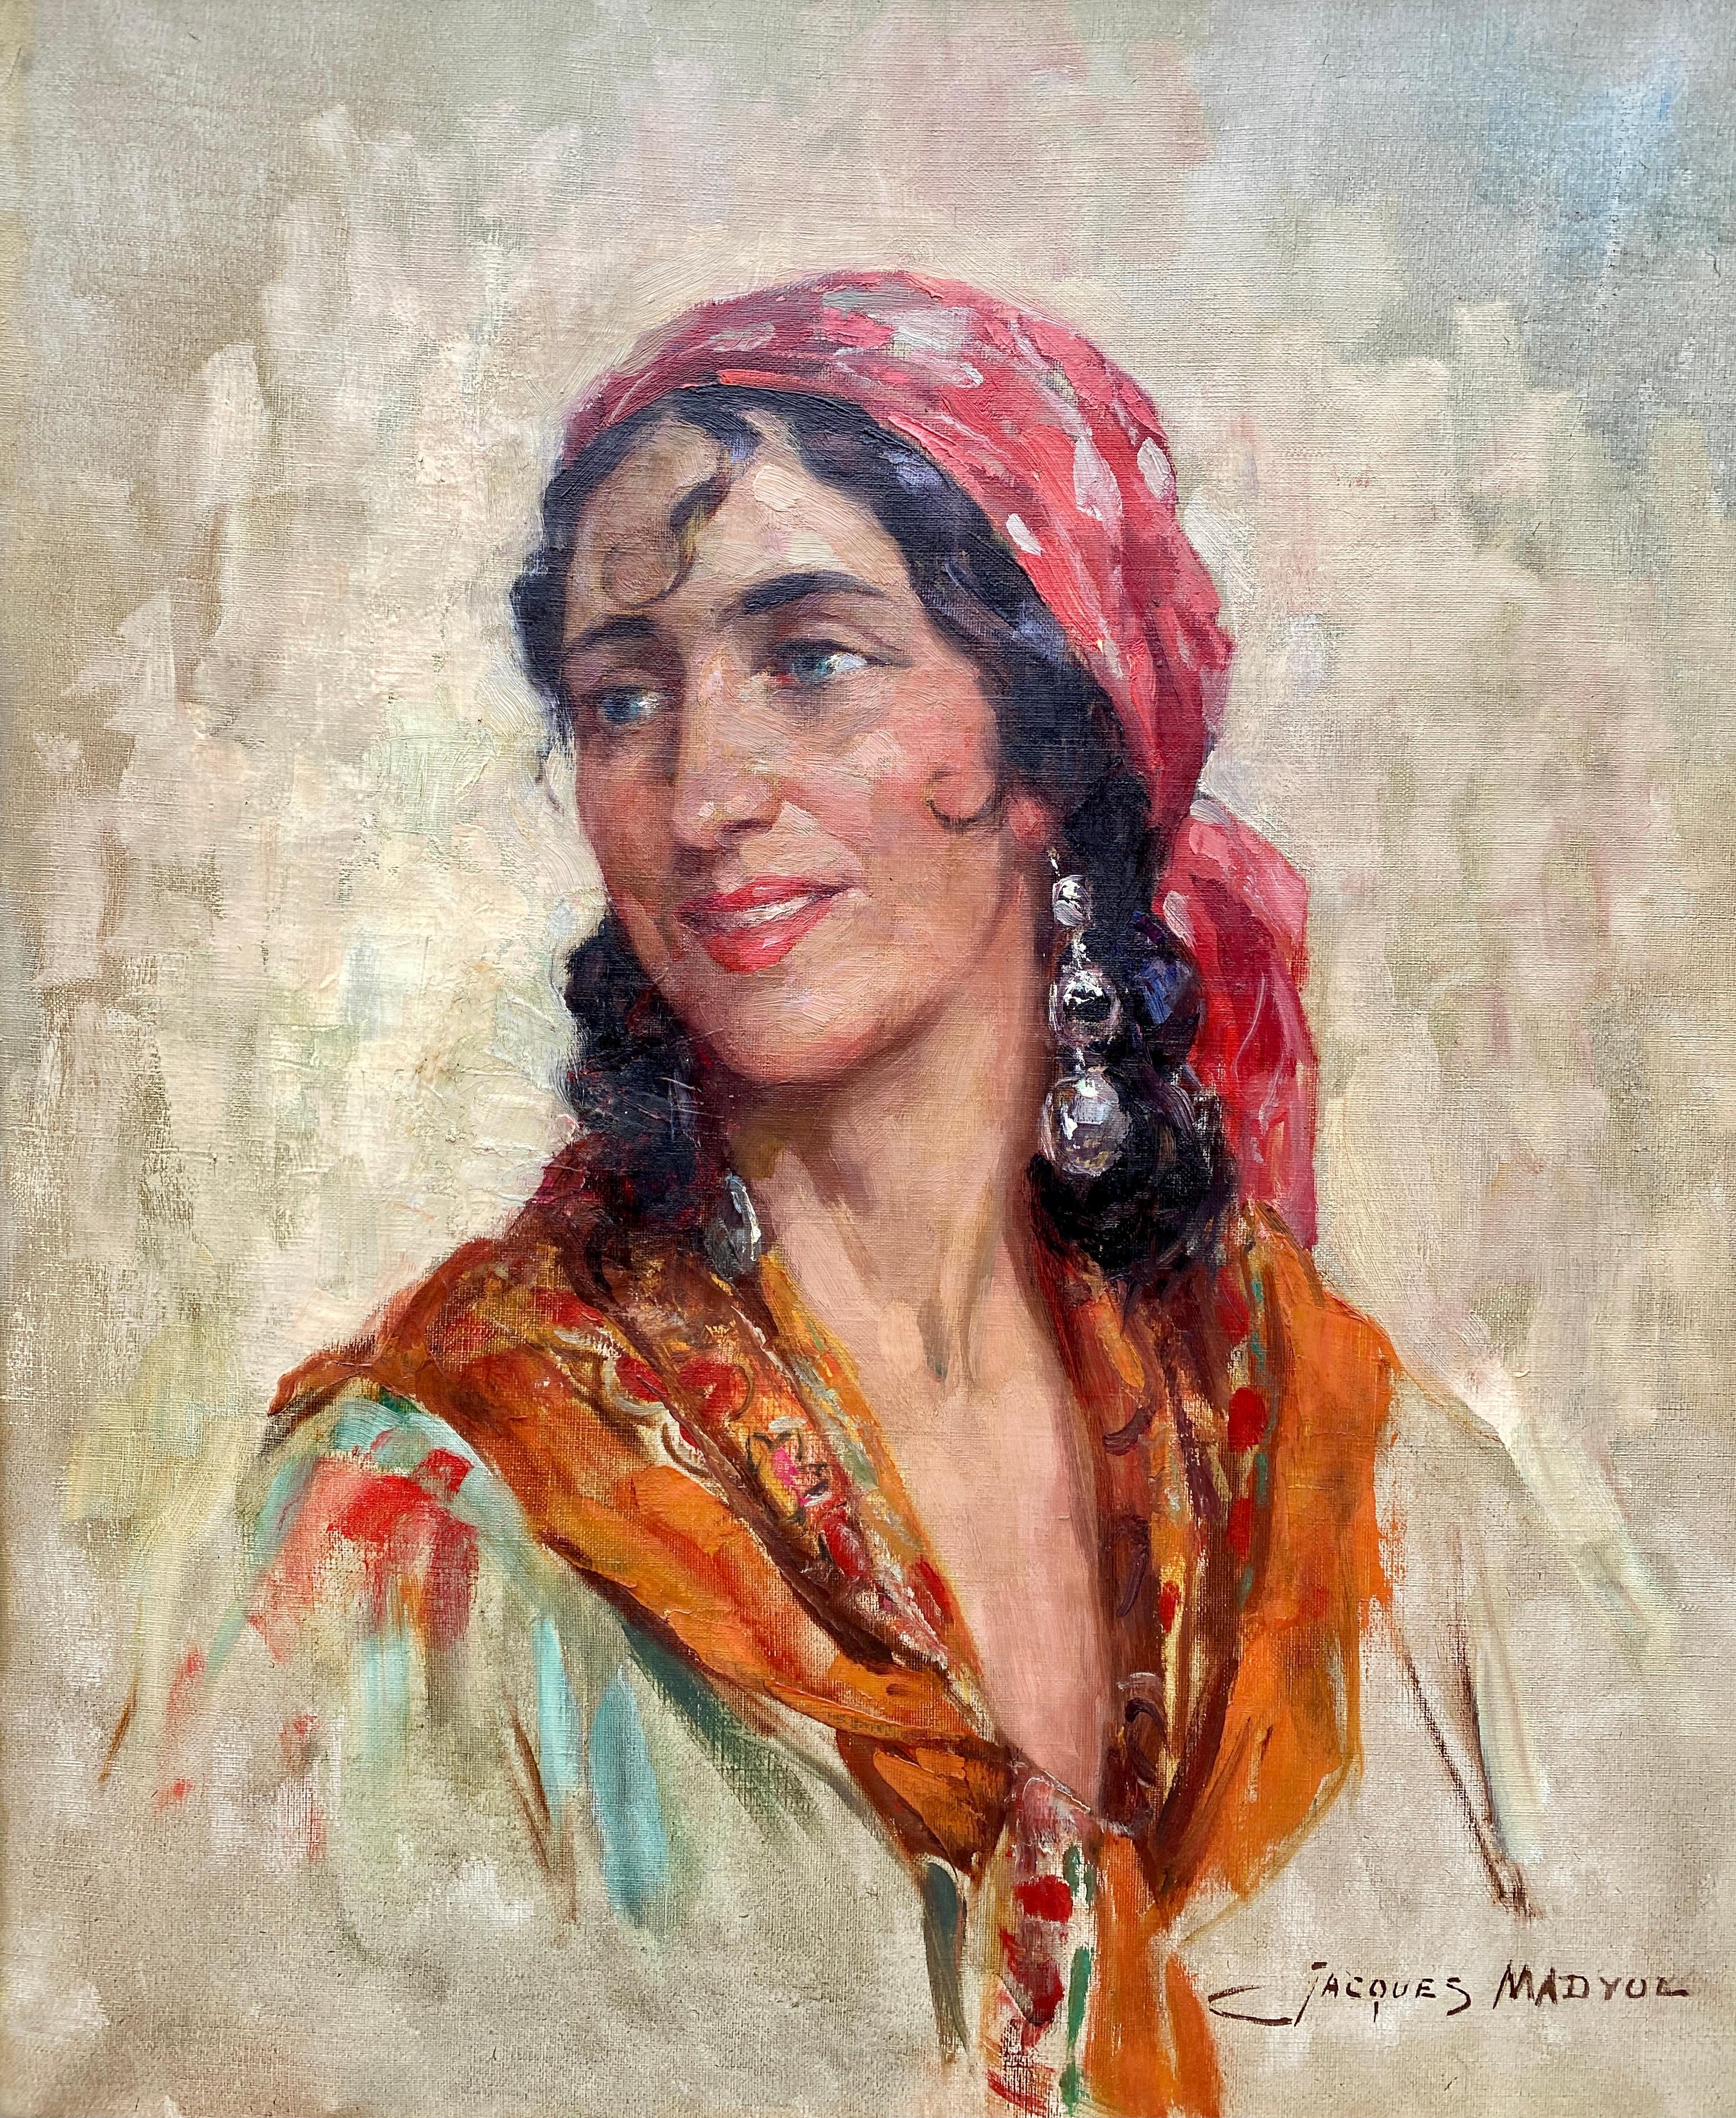 Jacques Madyol, Brussels 1871 – 1950, Belgian Painter, A Gypsy Lady For Sale 1